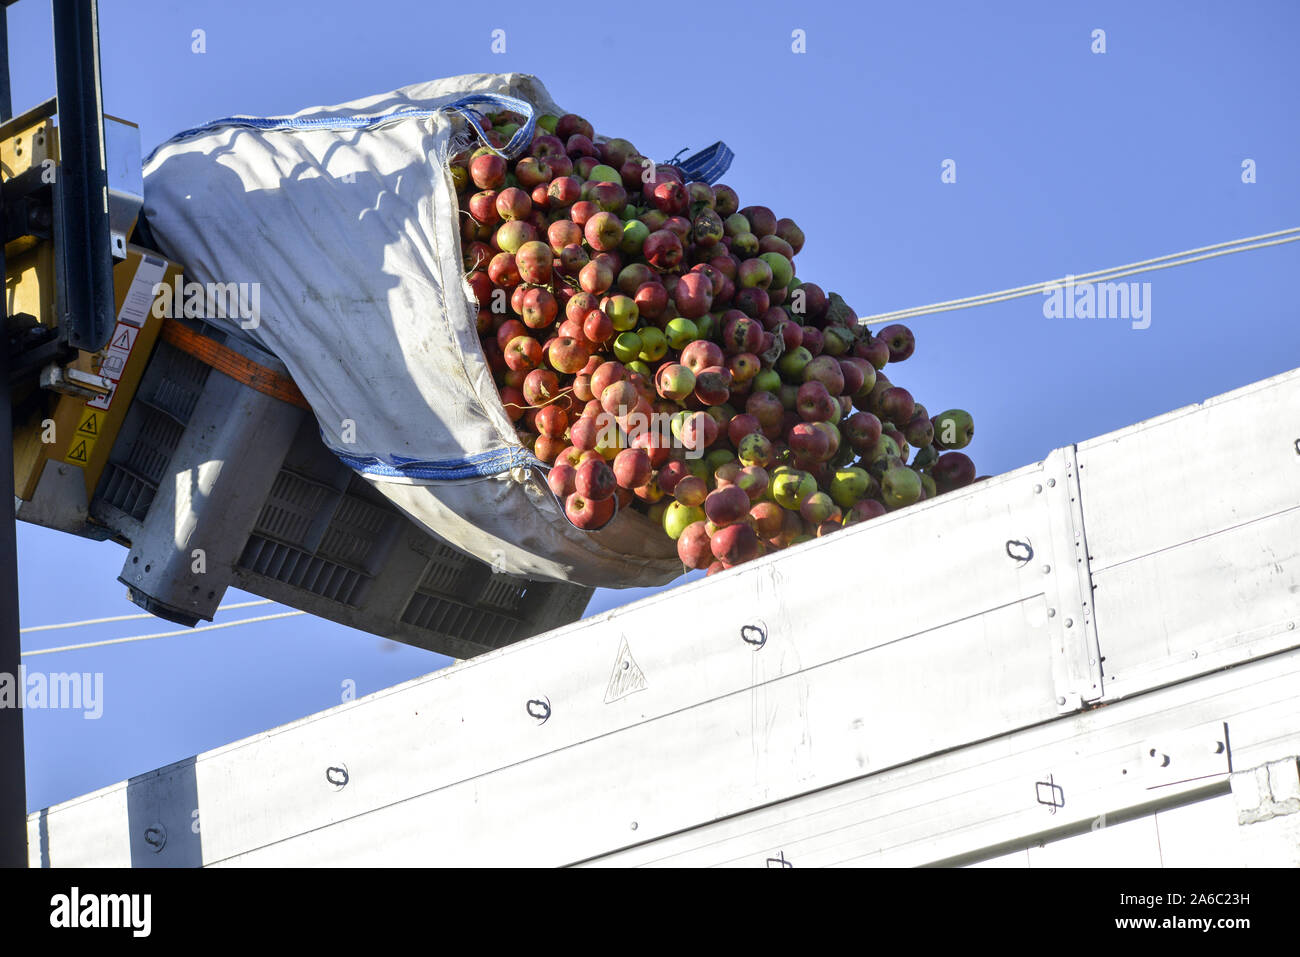 pouring industrial apples into a lorry image Stock Photo